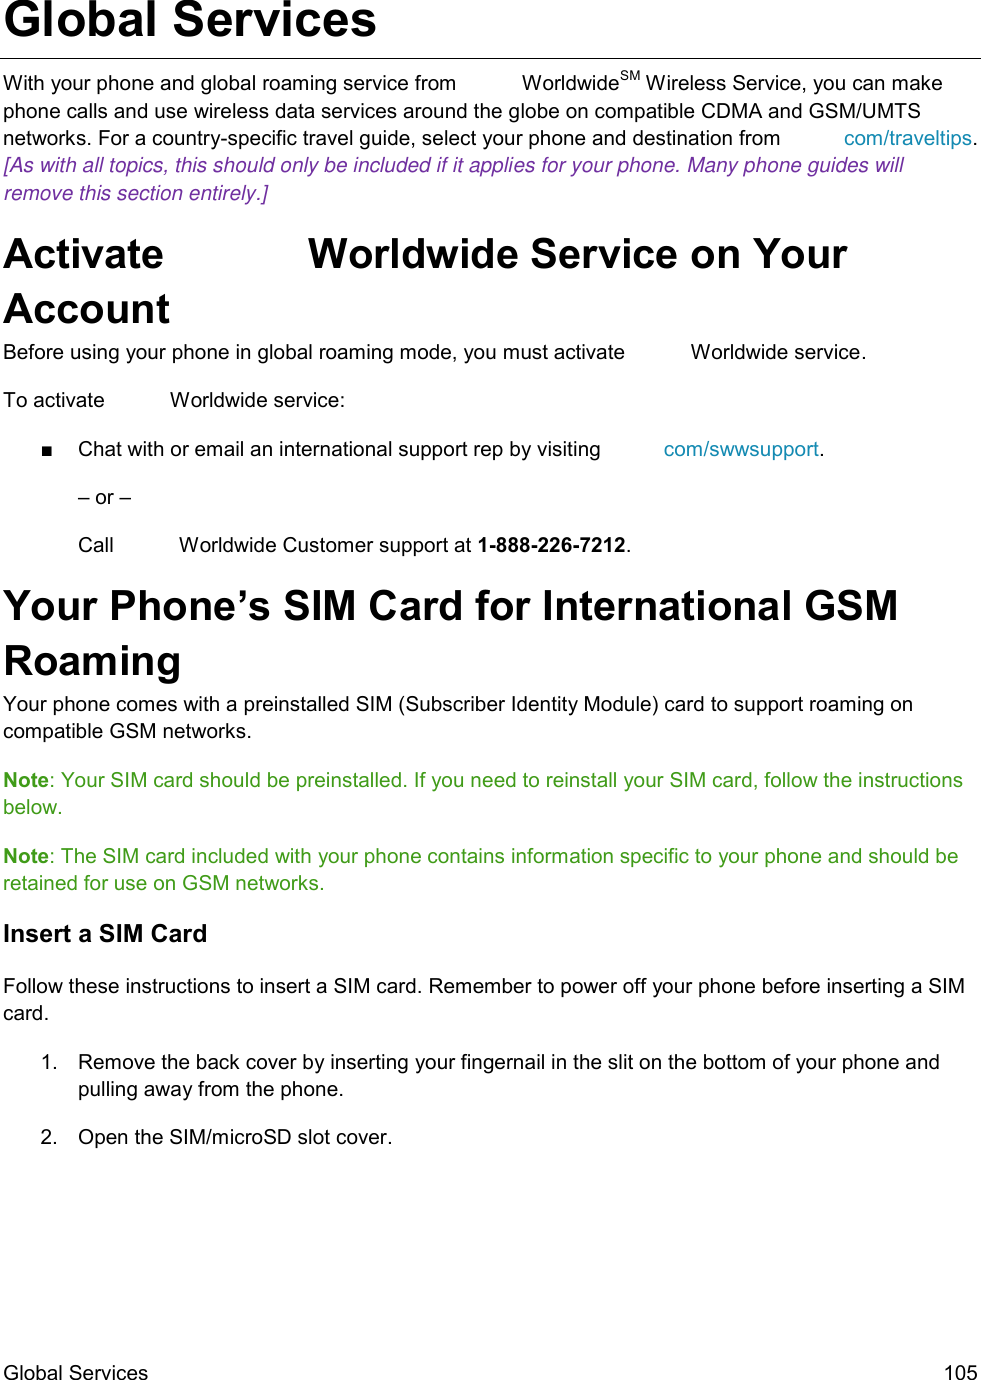  Global Services  105 Global Services With your phone and global roaming service from   WorldwideSM Wireless Service, you can make phone calls and use wireless data services around the globe on compatible CDMA and GSM/UMTS networks. For a country-specific travel guide, select your phone and destination from  com/traveltips. [As with all topics, this should only be included if it applies for your phone. Many phone guides will remove this section entirely.] Activate   Worldwide Service on Your Account  Before using your phone in global roaming mode, you must activate   Worldwide service.  To activate   Worldwide service: ■  Chat with or email an international support rep by visiting  com/swwsupport. – or – Call   Worldwide Customer support at 1-888-226-7212.  Your Phone’s SIM Card for International GSM Roaming  Your phone comes with a preinstalled SIM (Subscriber Identity Module) card to support roaming on compatible GSM networks. Note: Your SIM card should be preinstalled. If you need to reinstall your SIM card, follow the instructions below.  Note: The SIM card included with your phone contains information specific to your phone and should be retained for use on GSM networks. Insert a SIM Card Follow these instructions to insert a SIM card. Remember to power off your phone before inserting a SIM card. 1.  Remove the back cover by inserting your fingernail in the slit on the bottom of your phone and pulling away from the phone. 2.  Open the SIM/microSD slot cover. 